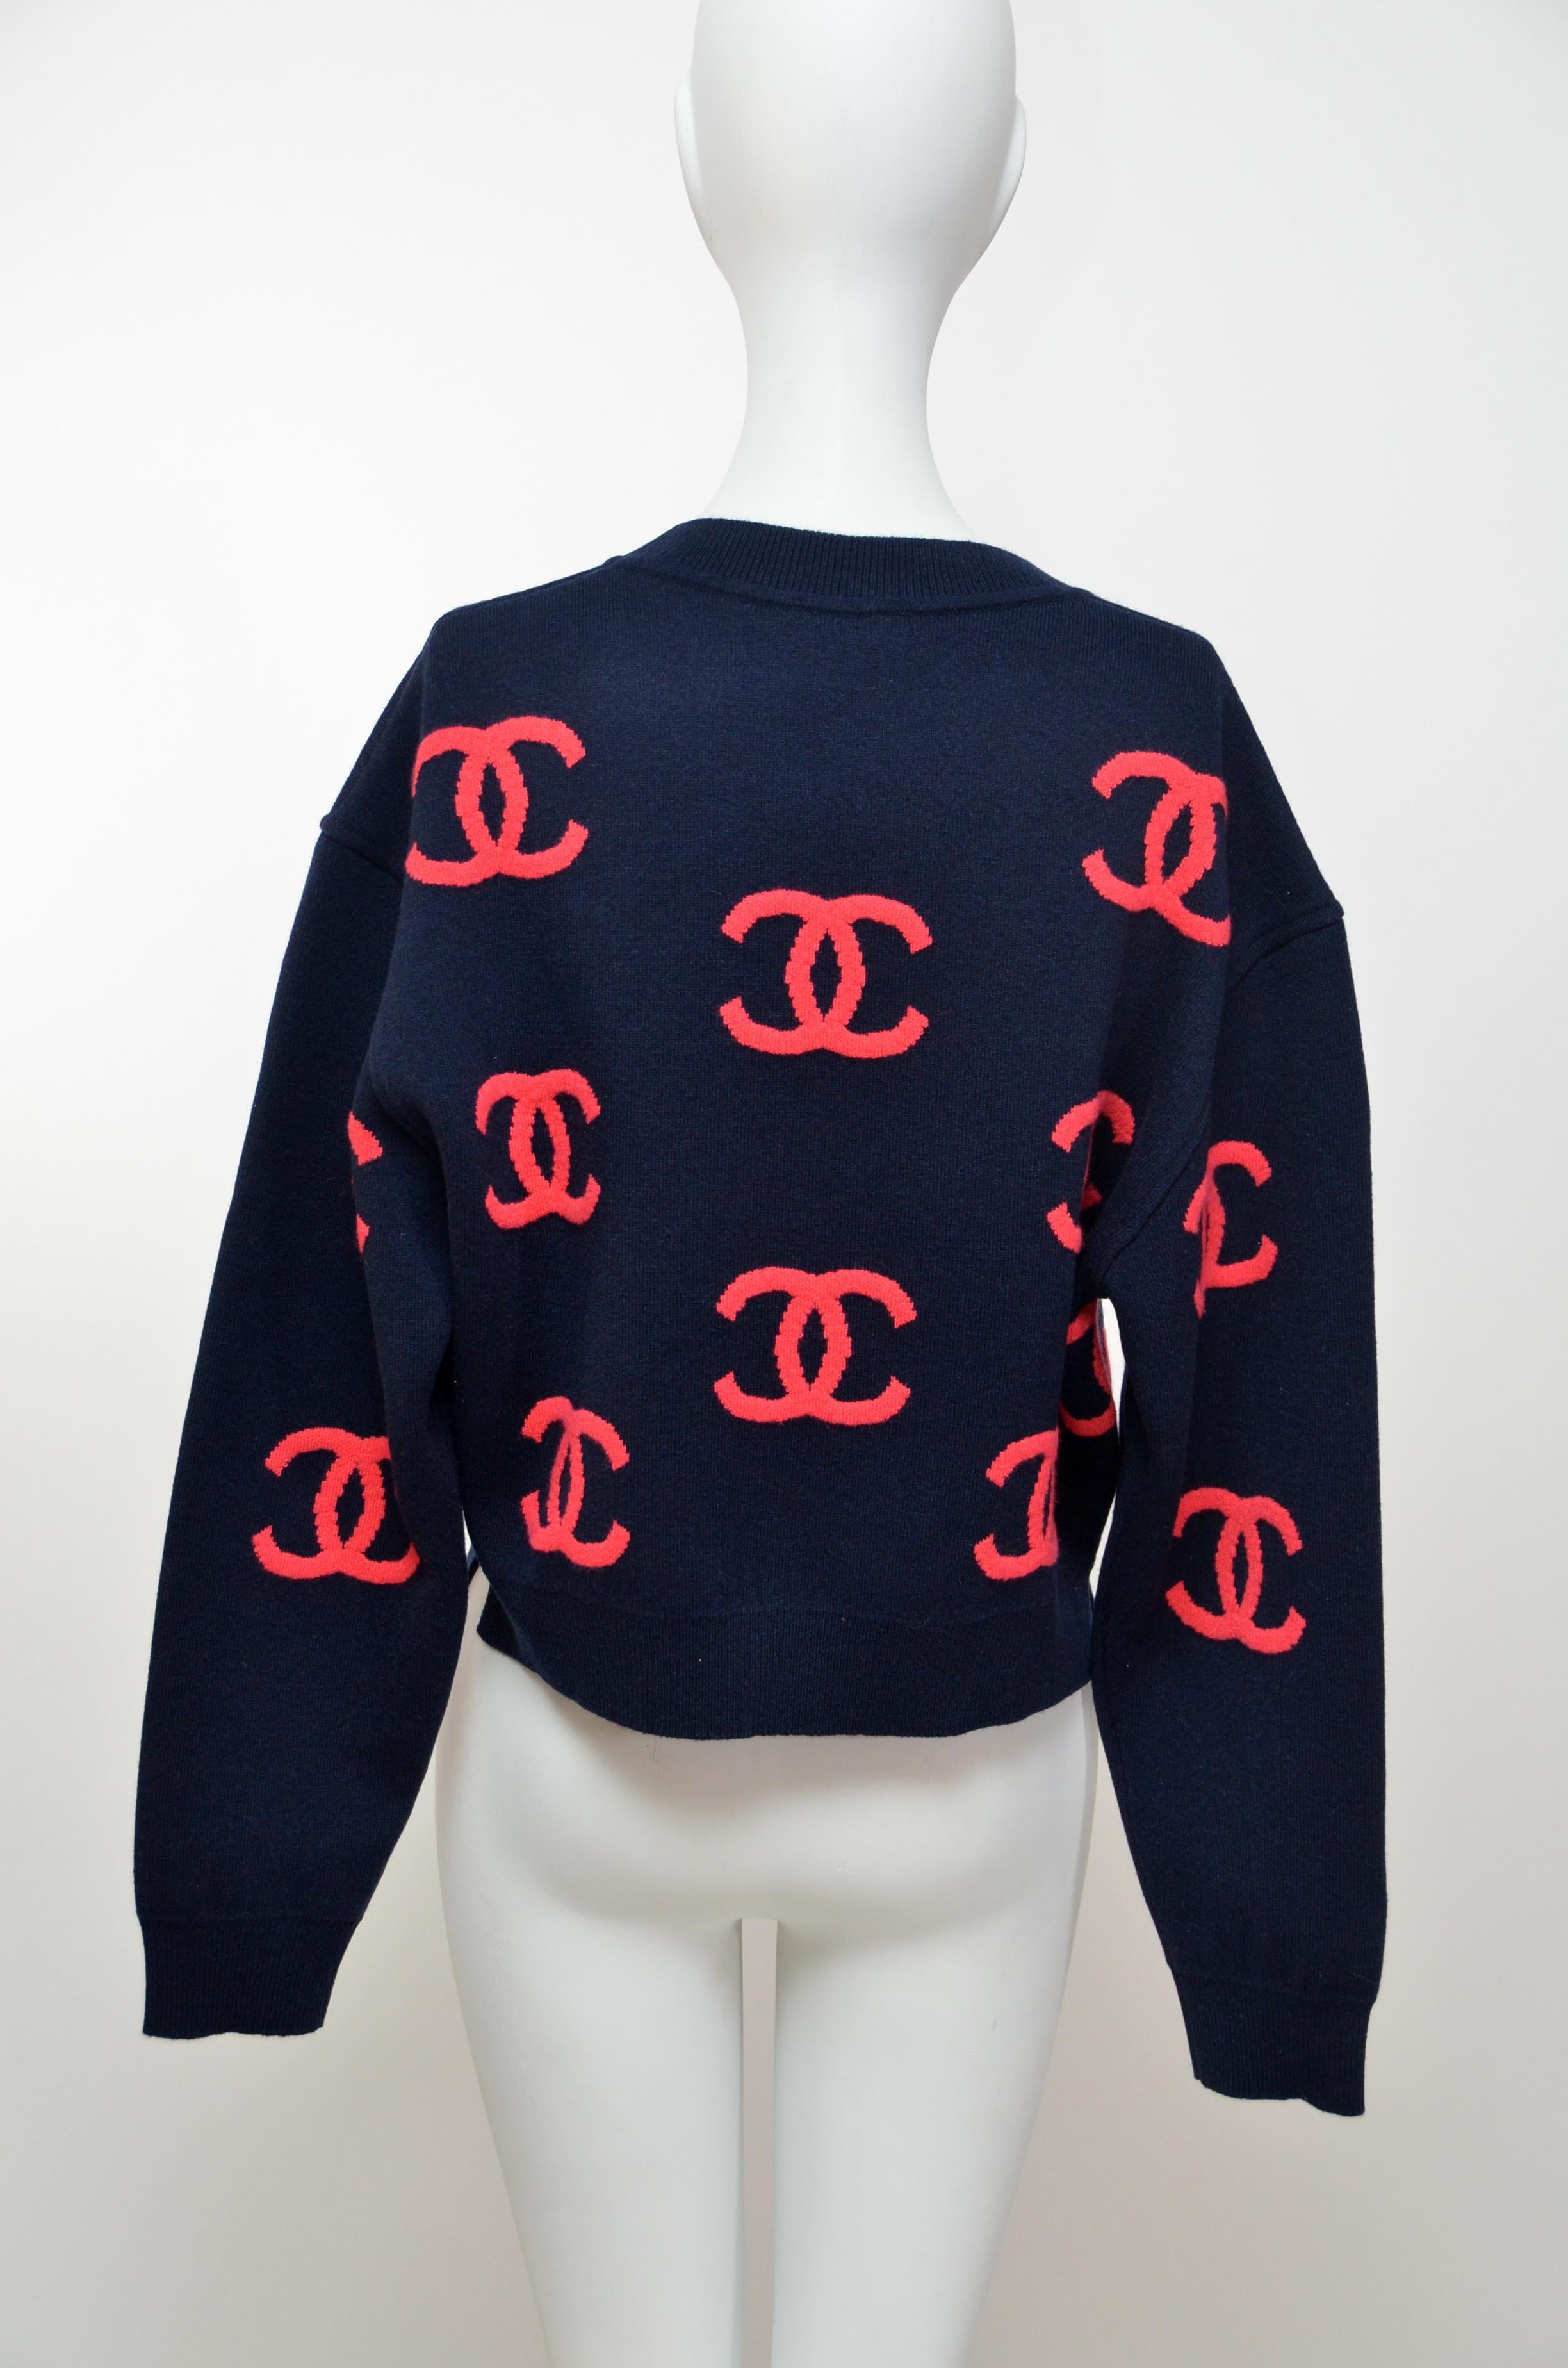 100% authentic Chanel sweater.Original receipt from Chanel available to purchaser upon request.
New with tags and knit pouch
Size 36 
Main base color in person is dark blue.Style is cropped .
Please familiarize yourself with Chanel fit before